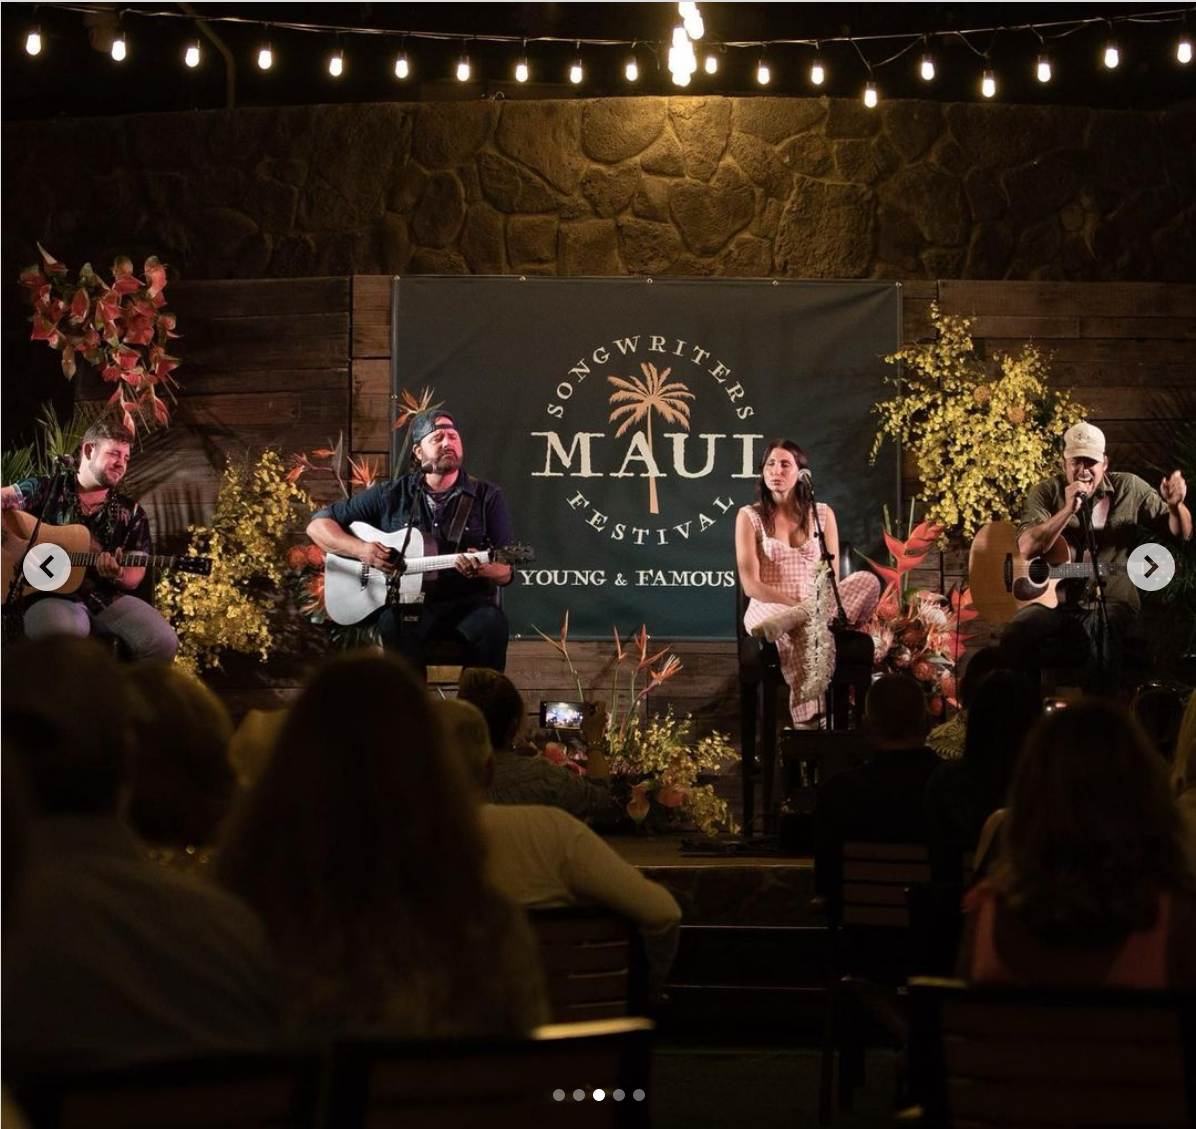 Kameron Marlowe, Randy Houser, Lily Meola, Lukas Nelson performing at Molokini Garden Lawn during Chris Young and Friends Finale for the 2023 Maui Songwriter's Festival